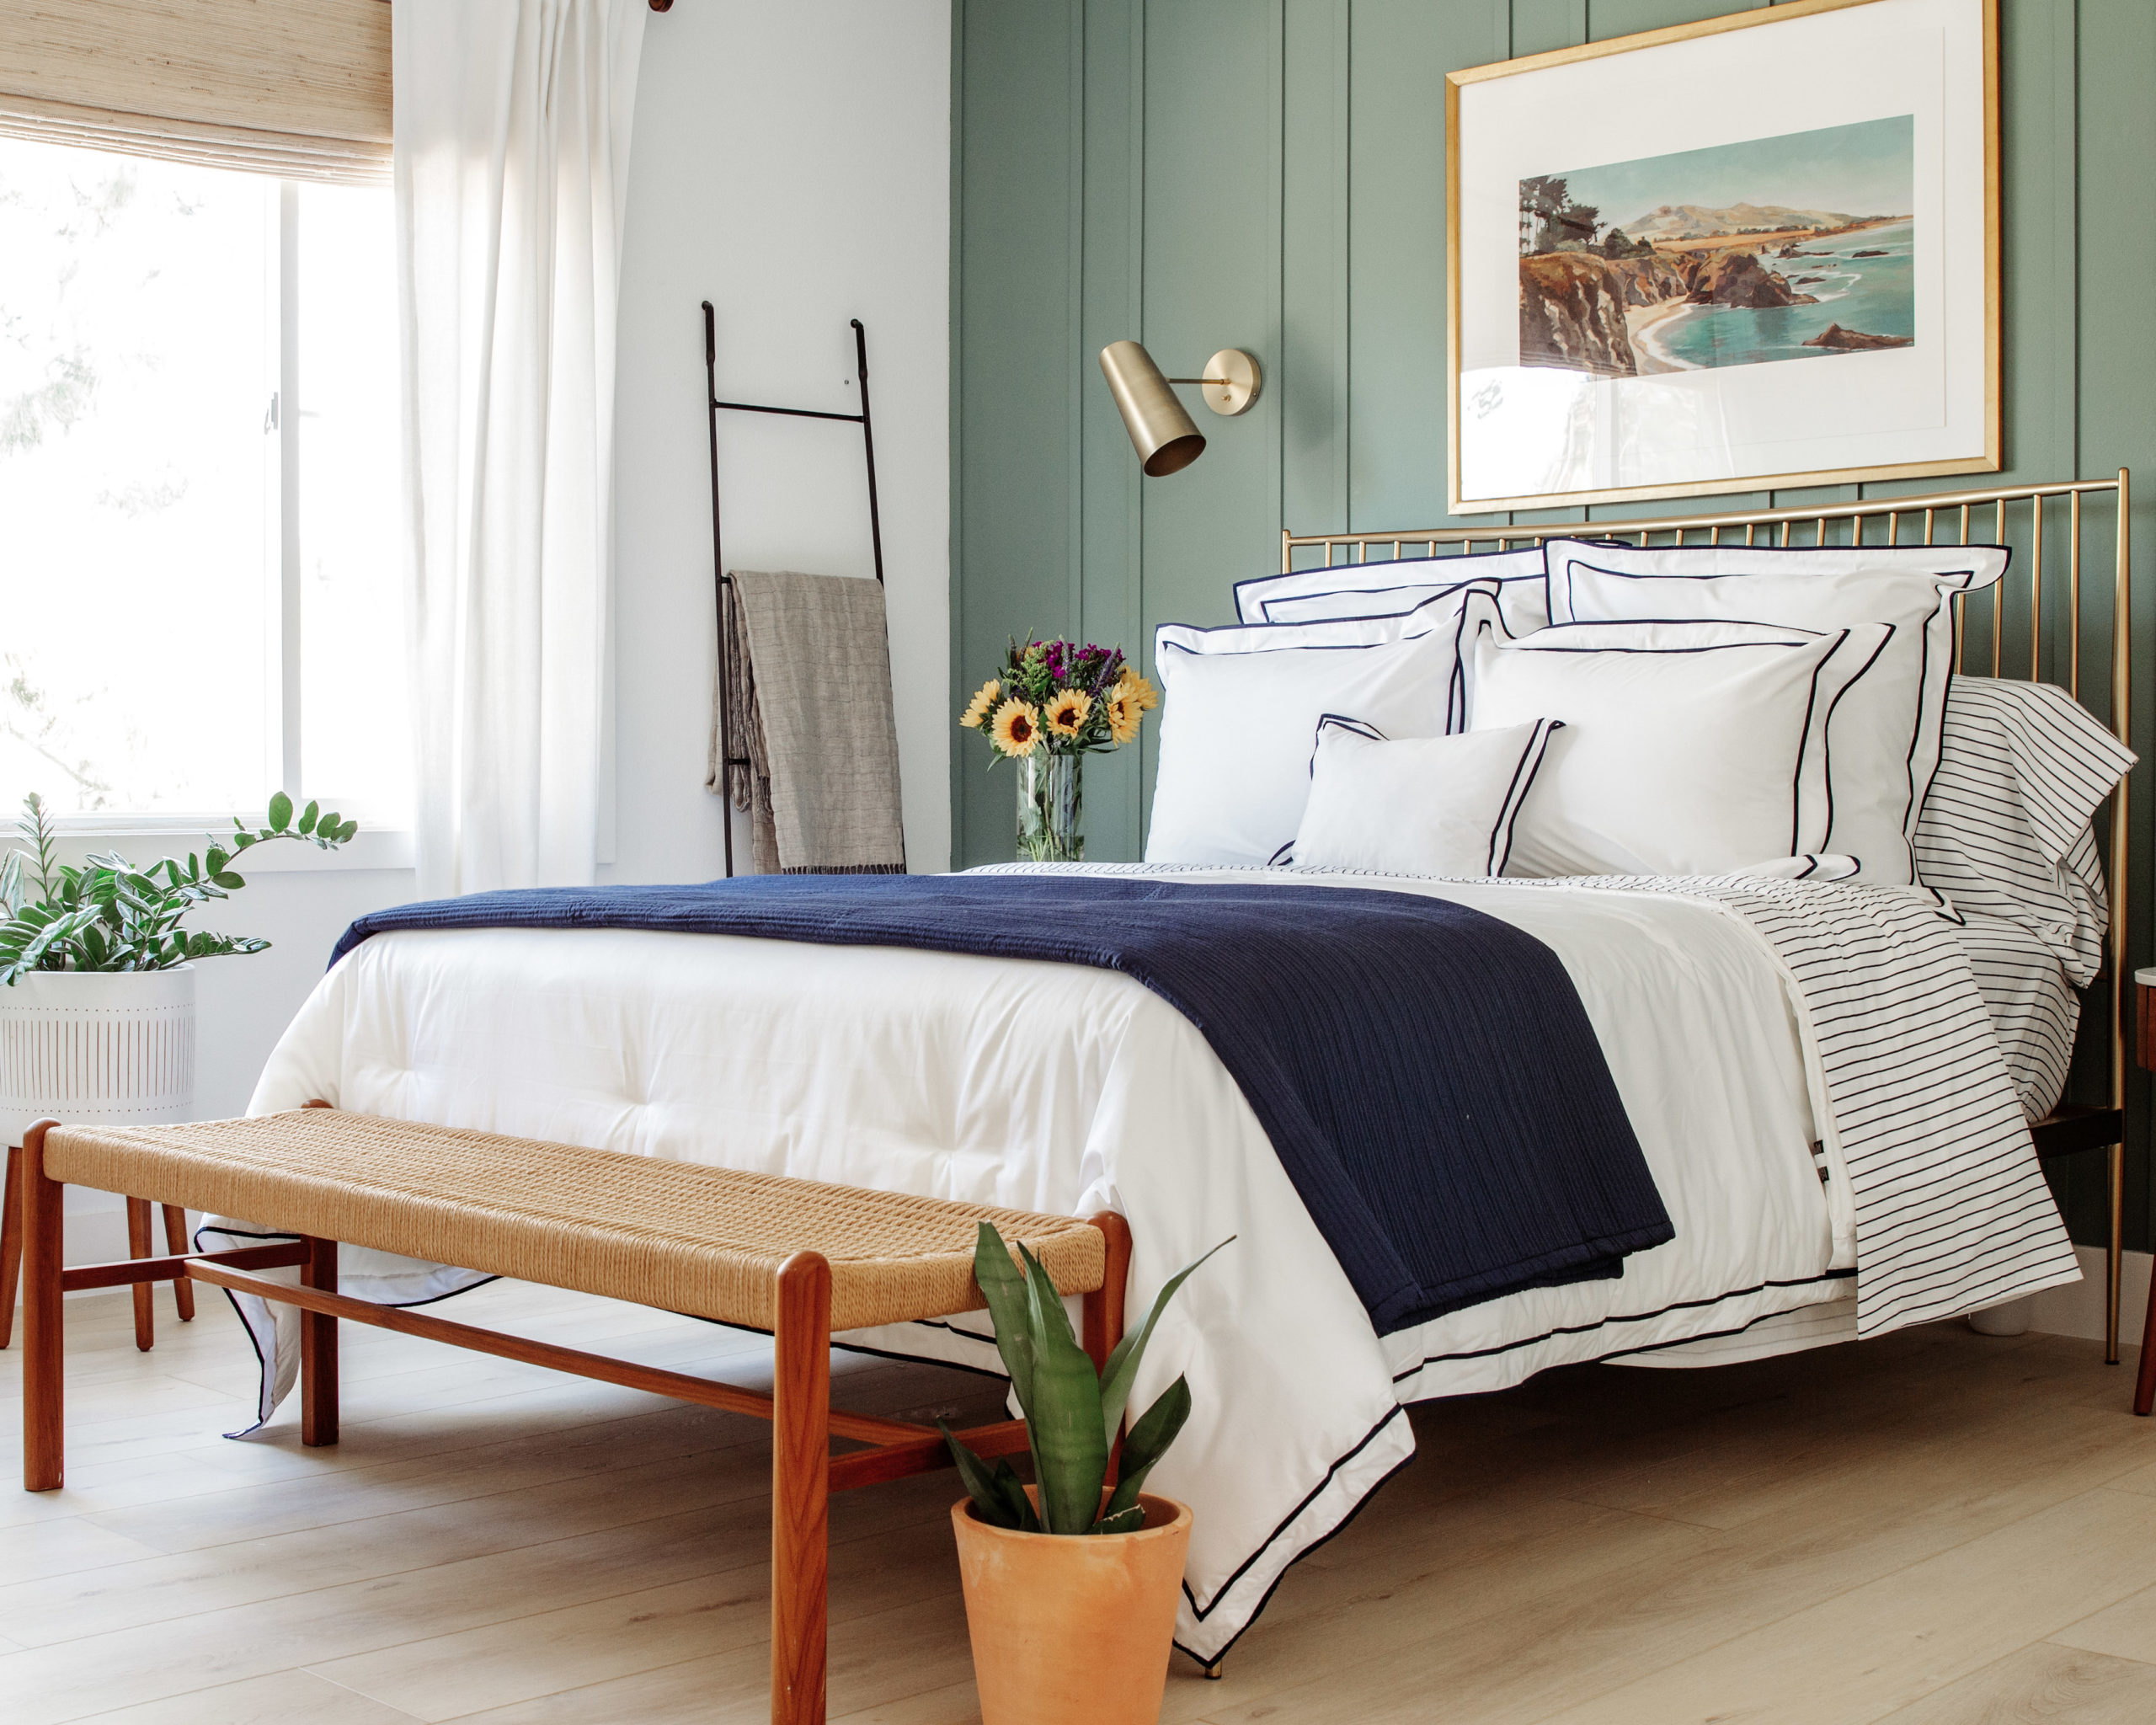 A soothing night's sleep starts with a beautiful, uncluttered bedroom.